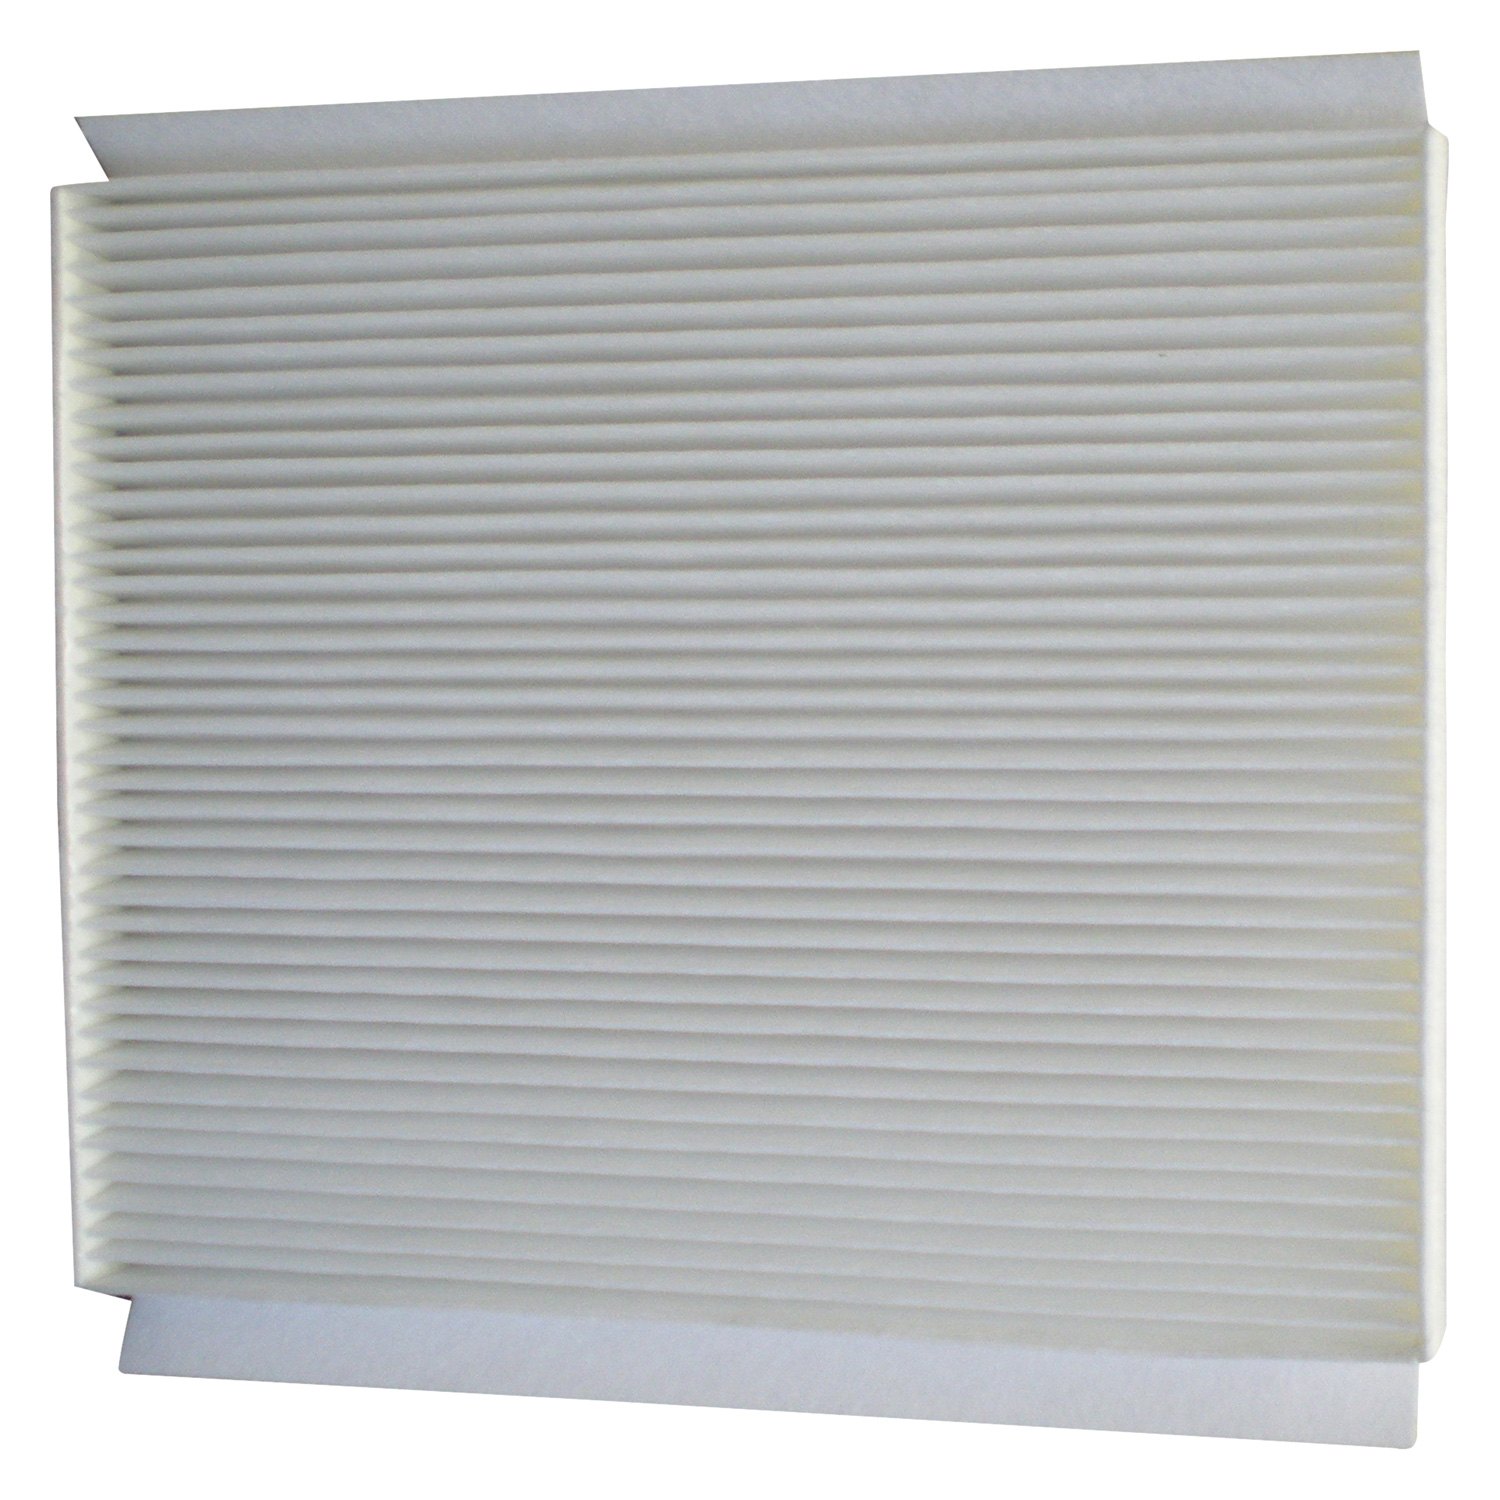 ACDelco CF3244 Professional Cabin Air Filter 